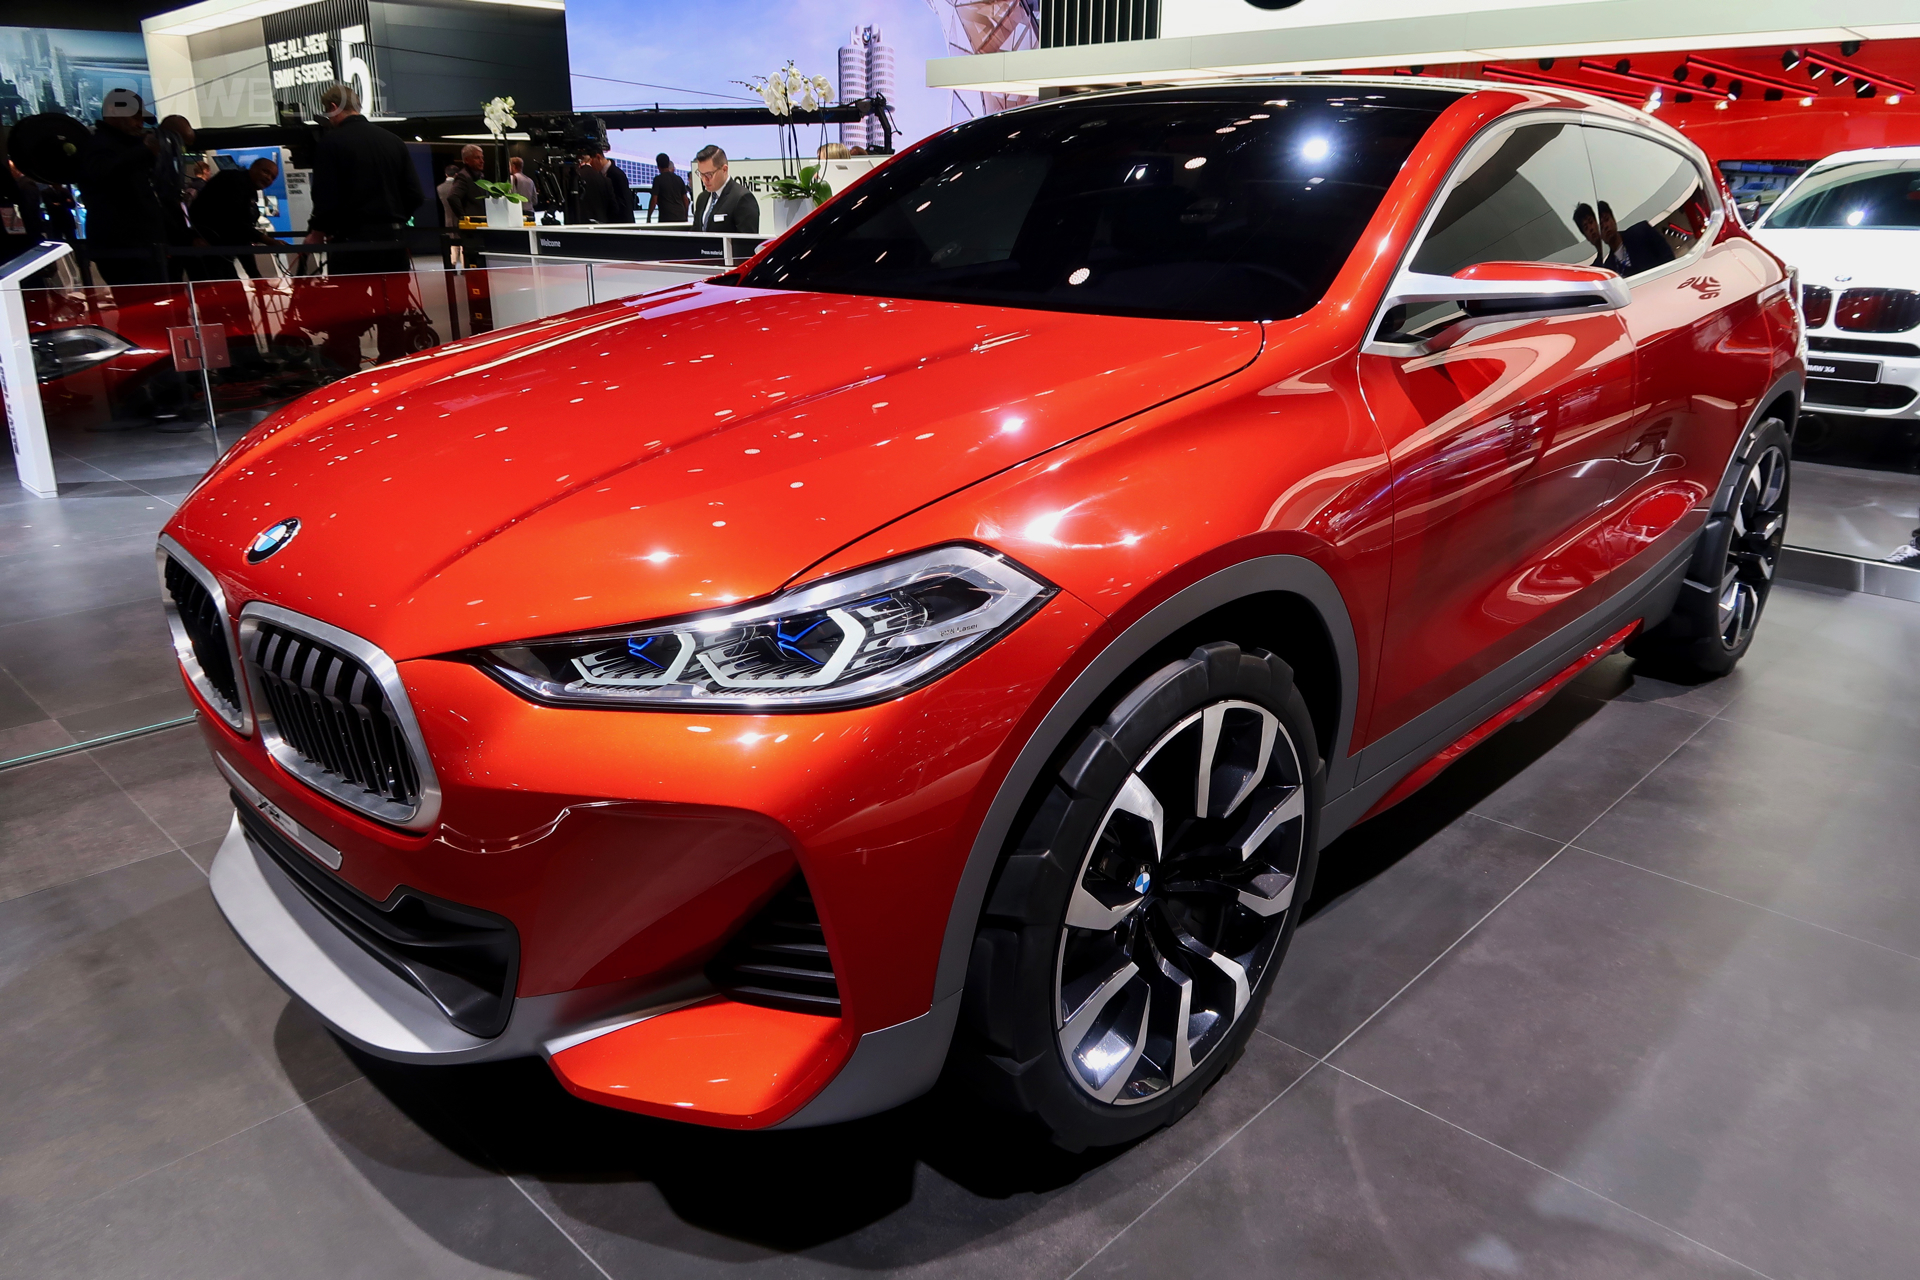 BMW Confirms Plans for Future High-Performance Crossovers to Meet High Demand